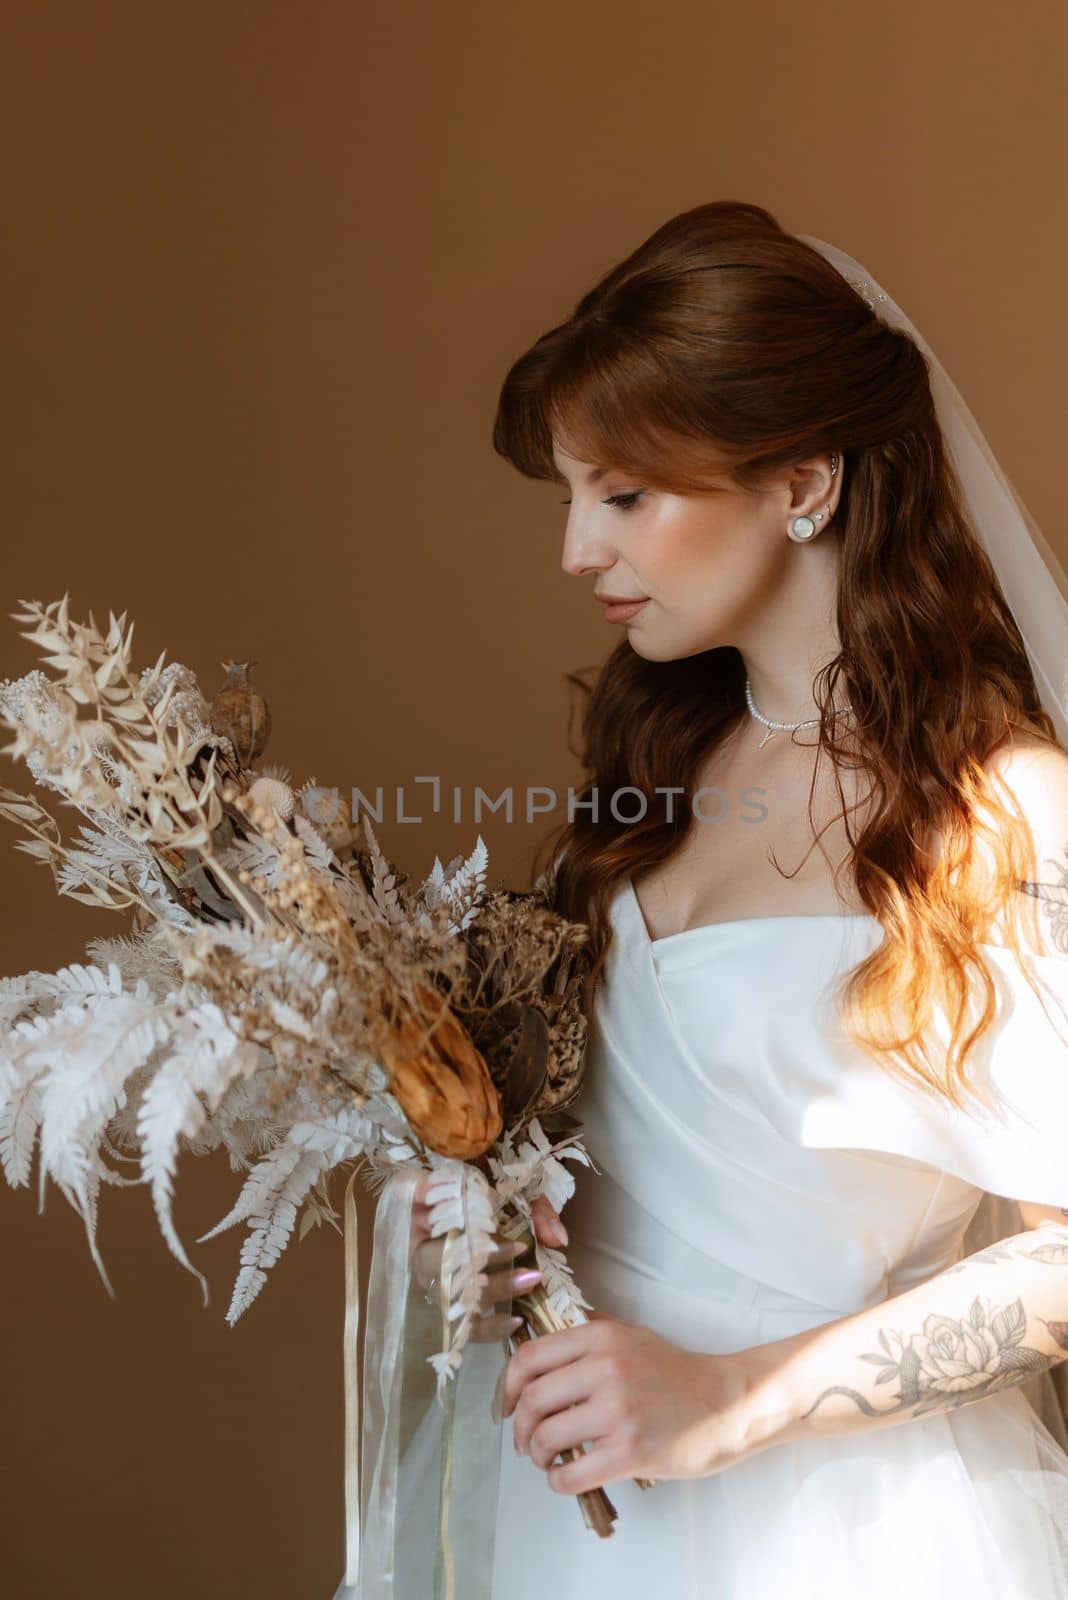 portrait of a bride girl with red hair in a white wedding dress by Andreua